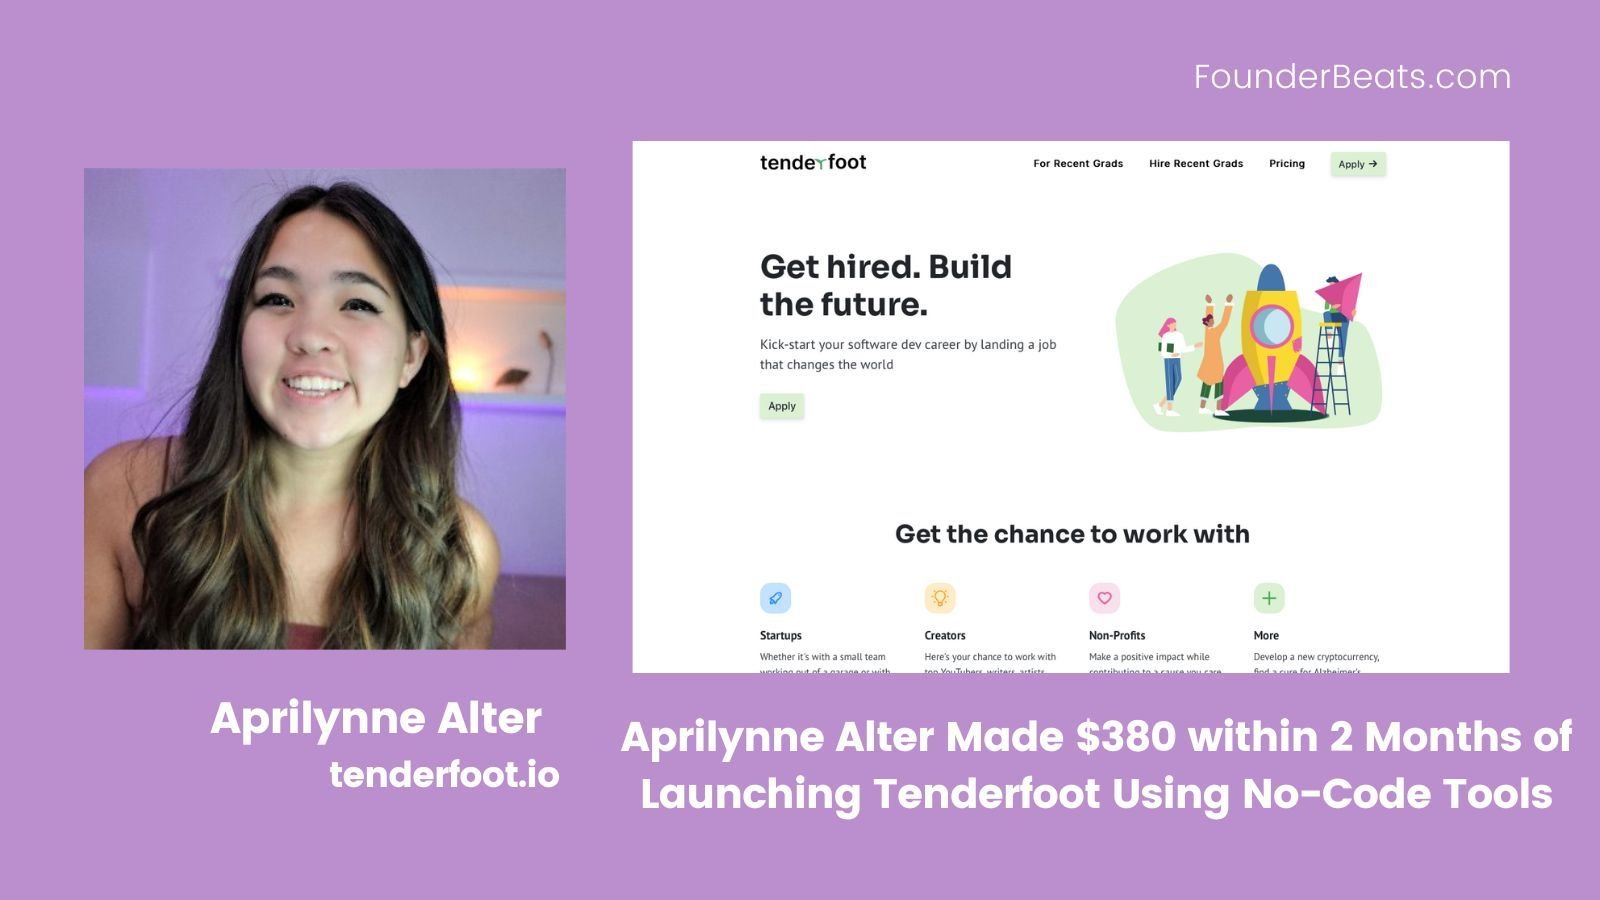 Aprilynne Alter Made $380 within 2 Months of Launching Tenderfoot Using No-Code Tools